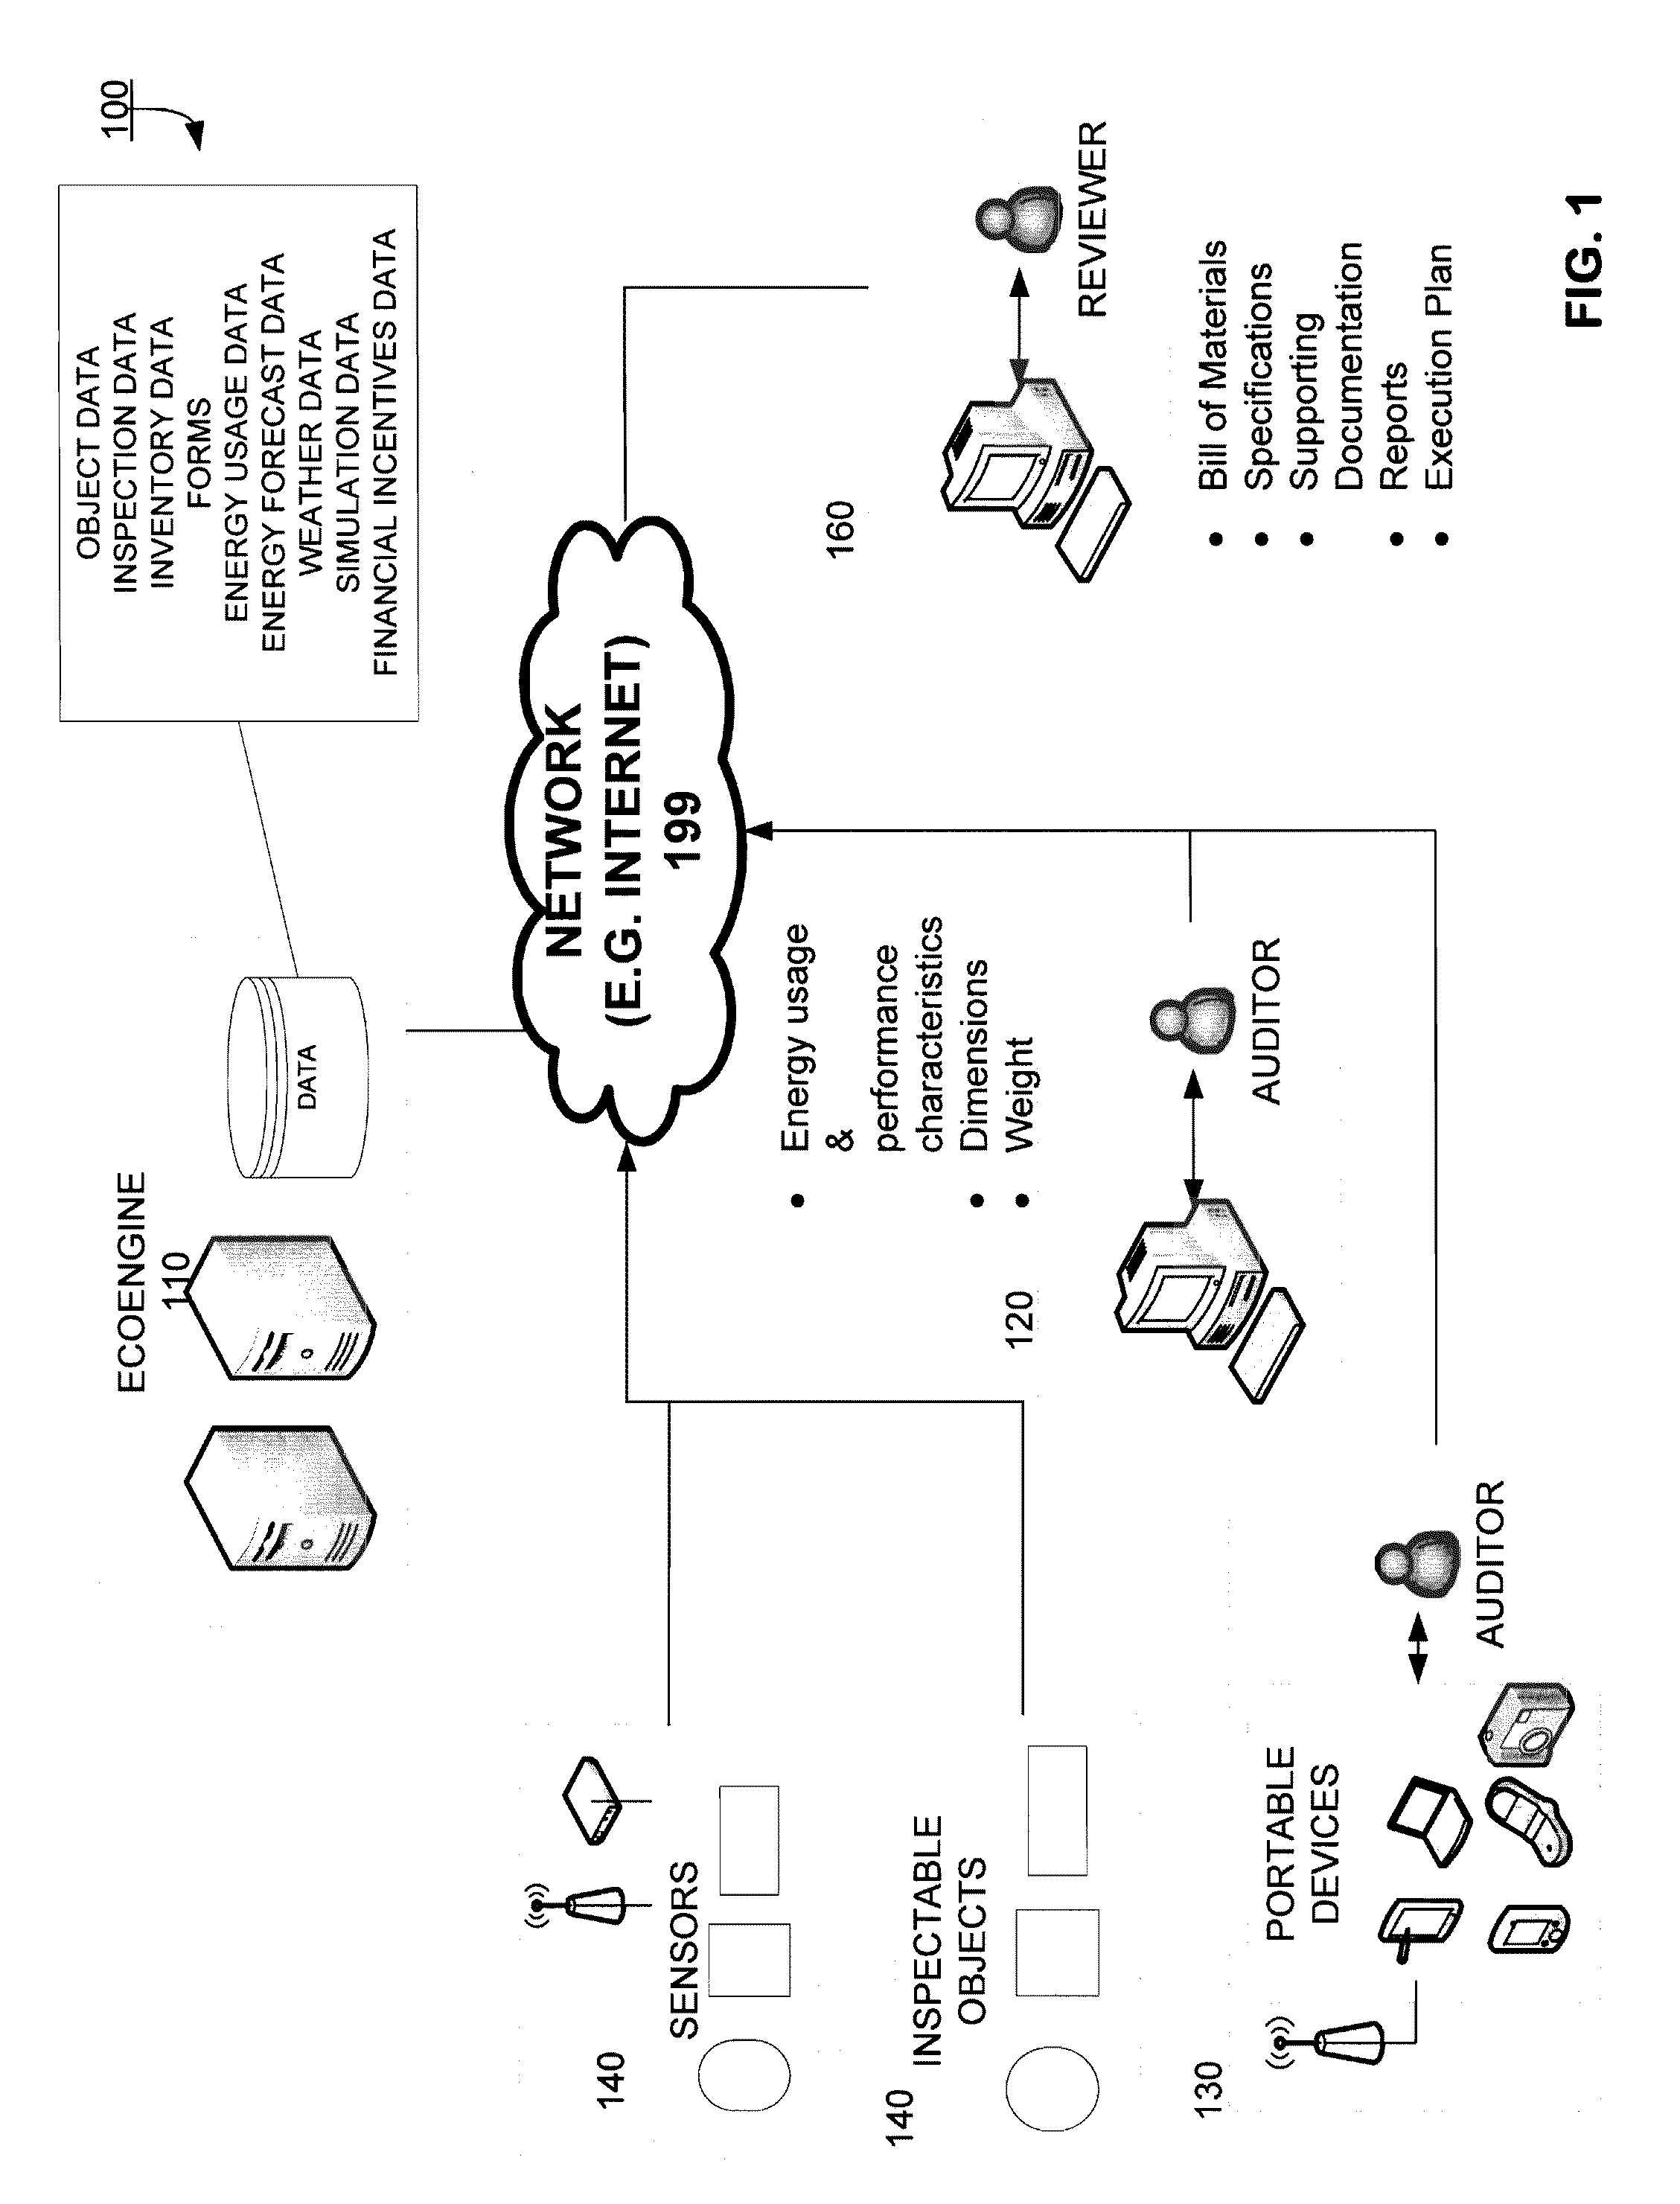 System and method for gathering and utilizing building energy information